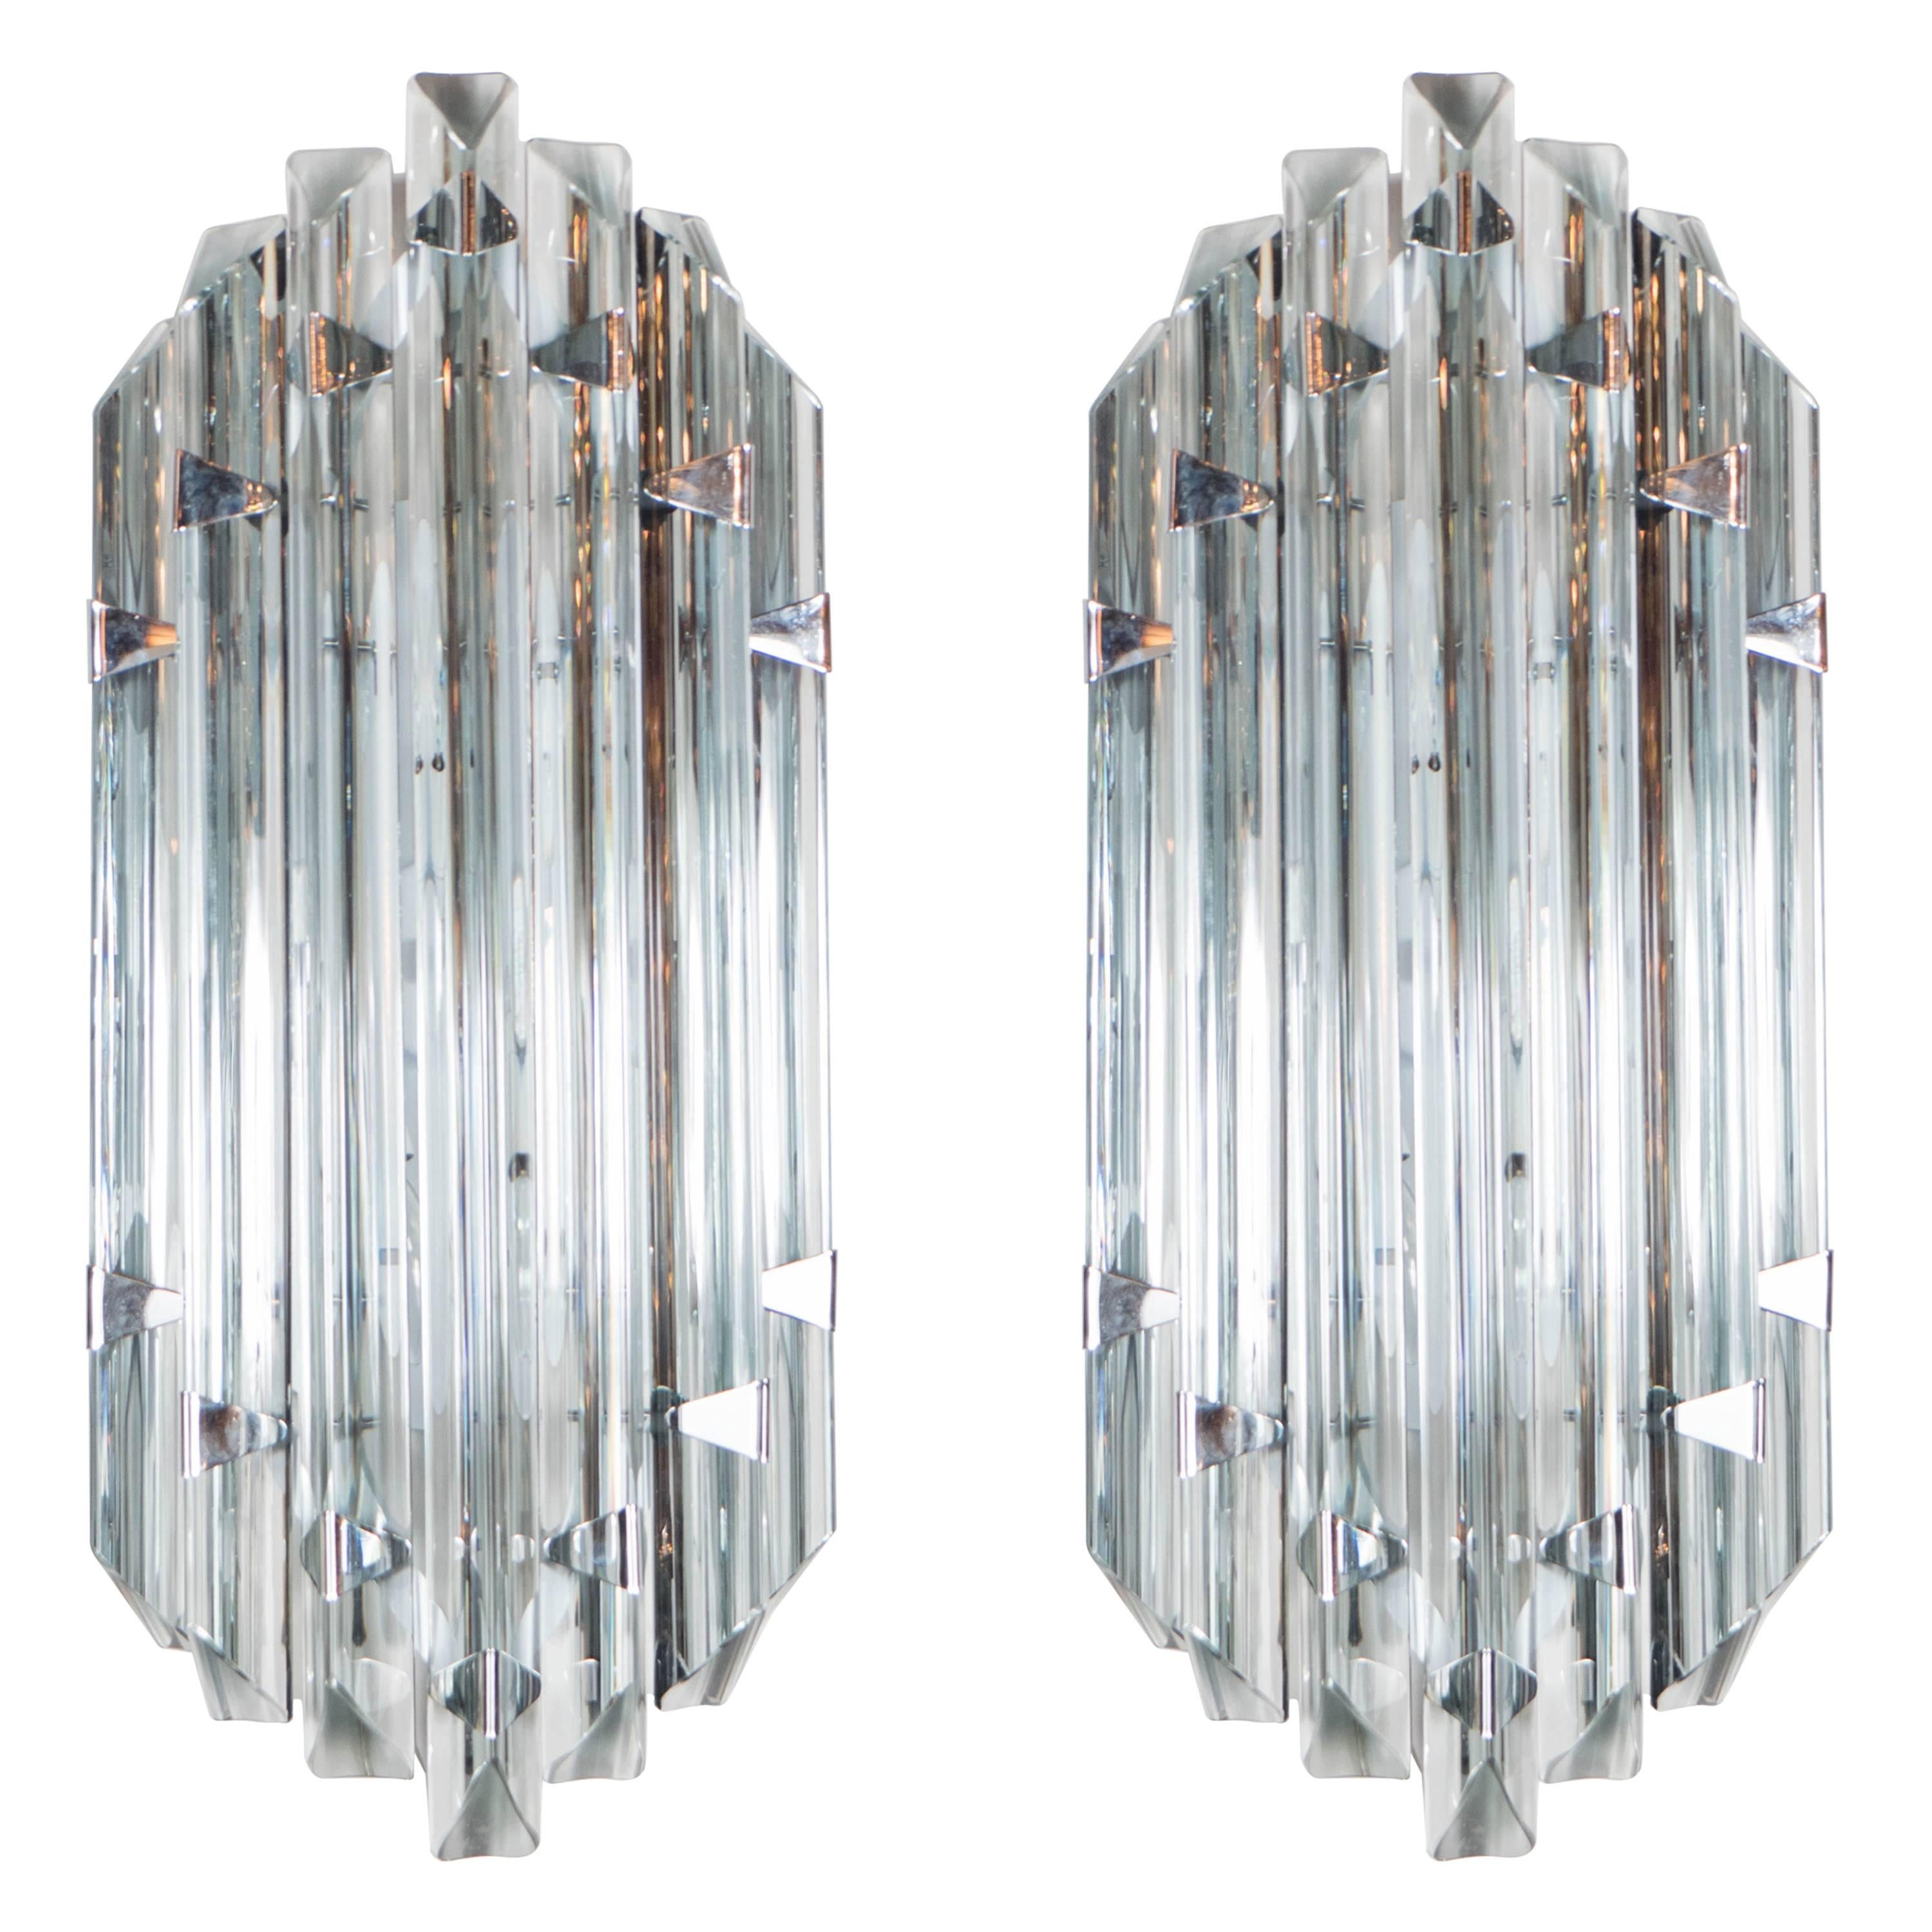 Pair of Mid-Century Modernist Sconces in Smoked Murano Glass with Nickel